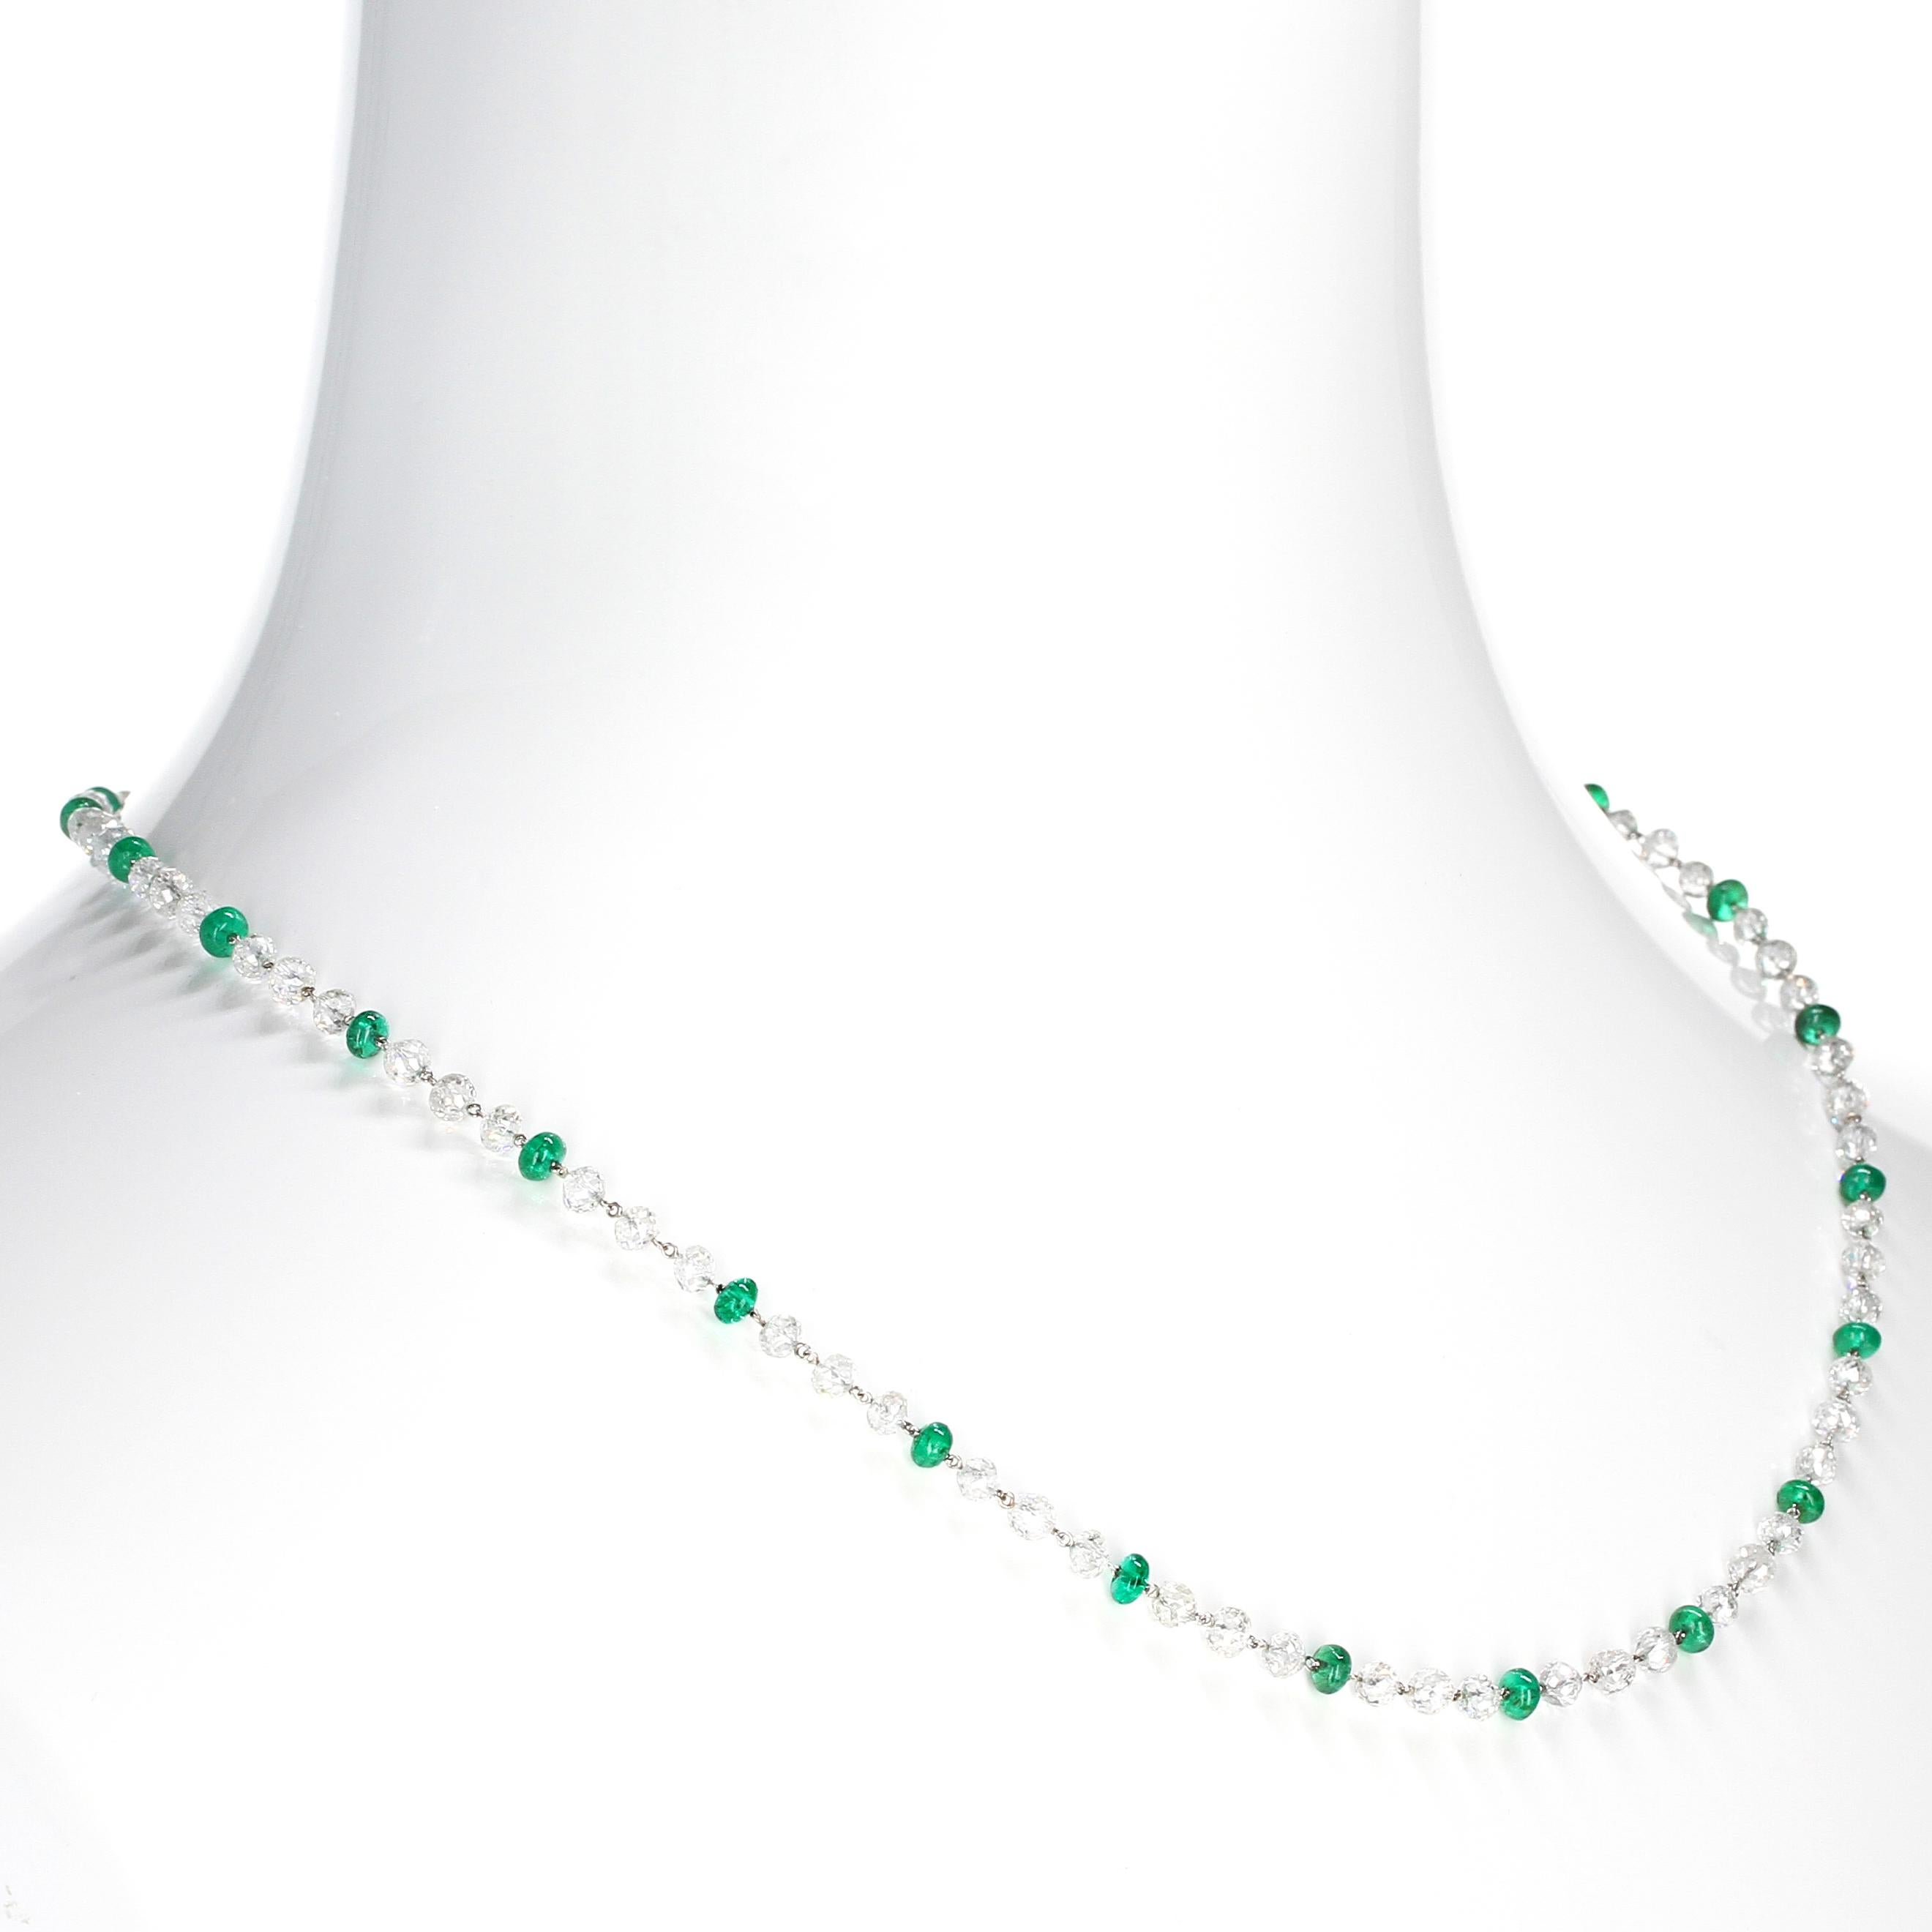 An elegant and chic diamond and emerald bead link necklace, hand-made in Platinum, with an estimated color-clarity of the diamonds as E/F-color, with VS-clarity weighing a total of approximately twenty-five carats. The necklace measures 18 inches,